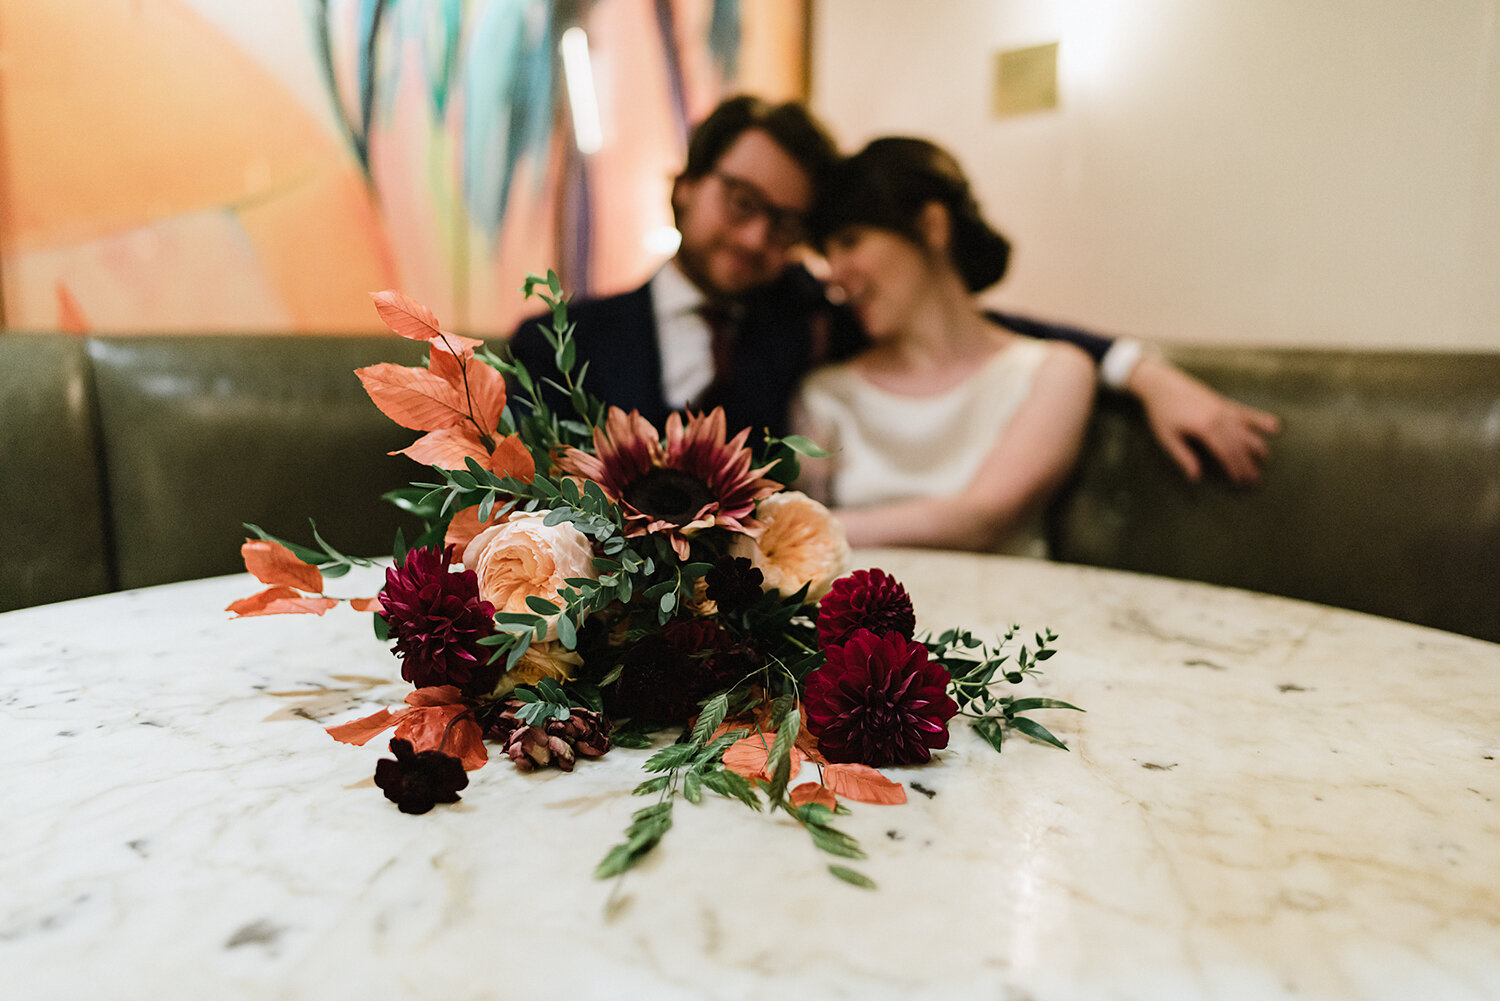 couples-portraits-at-the-drake-hotel-bar-bouquet-by-coriander-girl-moody-romantic-intimate-inspiration-Toronto-Elopement-at-the-Drake-Hotel-pop-up-Torontos-Best-wedding-photographers-candid-documentary-photojournalistic-elopement-inspiration.JPG